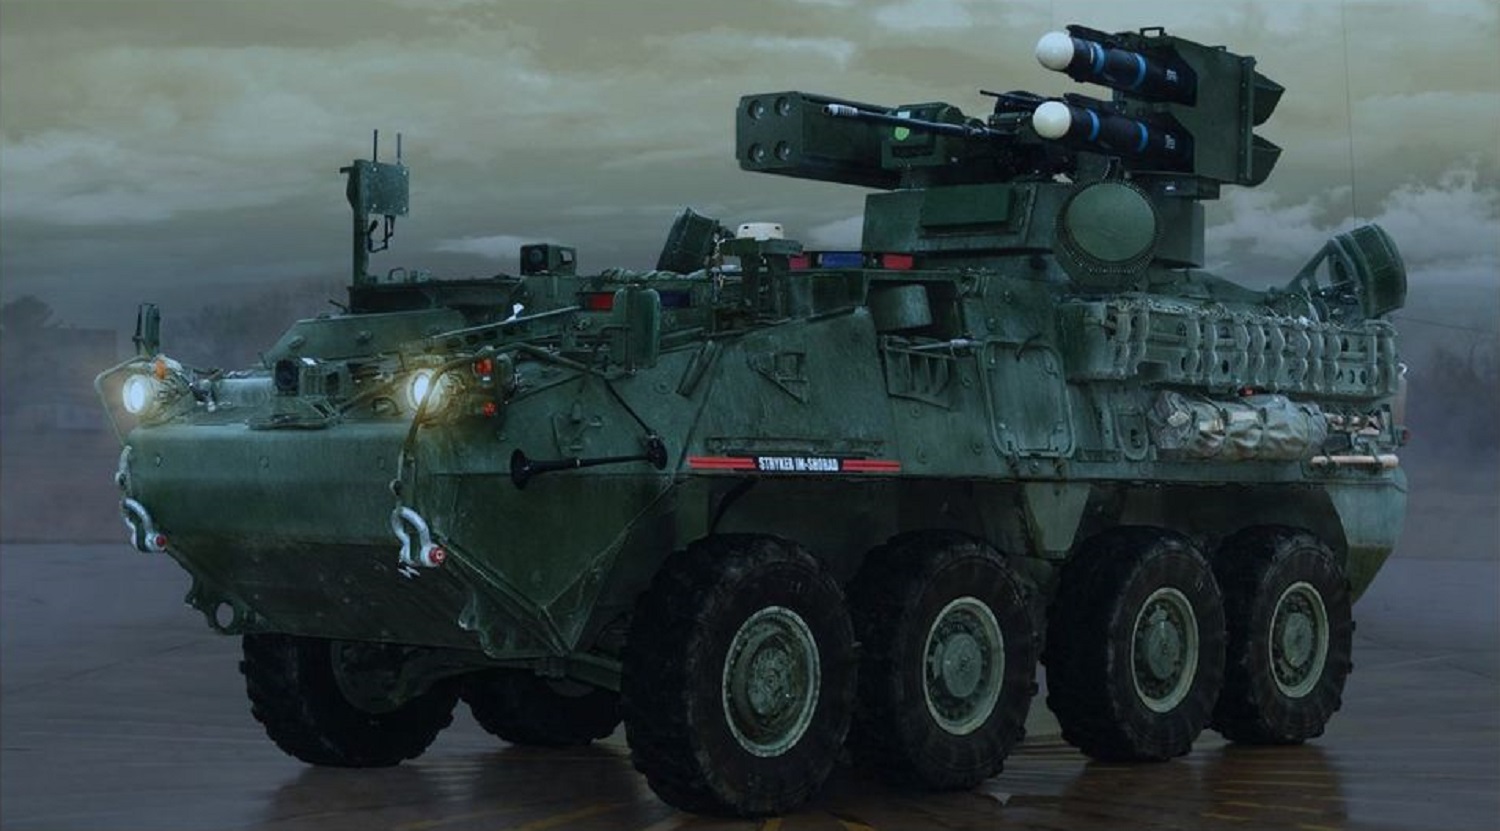 Leonardo DRS Awarded $600 Million Contract for US Army IM-SHORAD Mission Equipment Packages